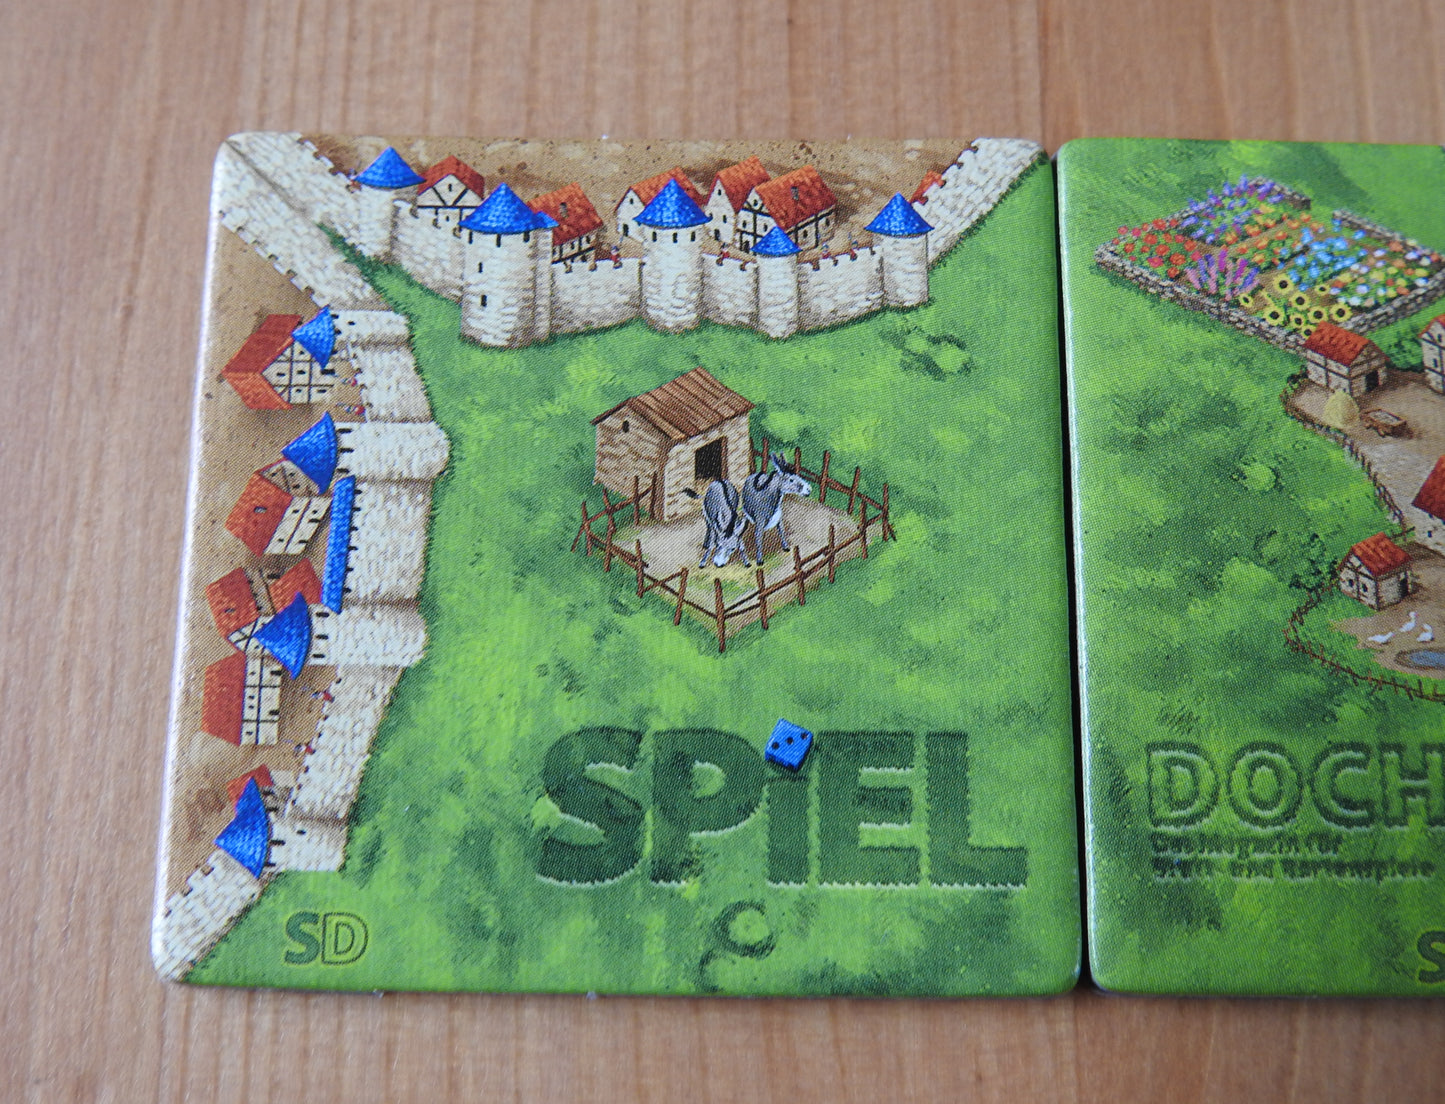 A closer view of the 'Spiel' tile featuring a donkey's stable as part of this mini expansion for Carcassonne.